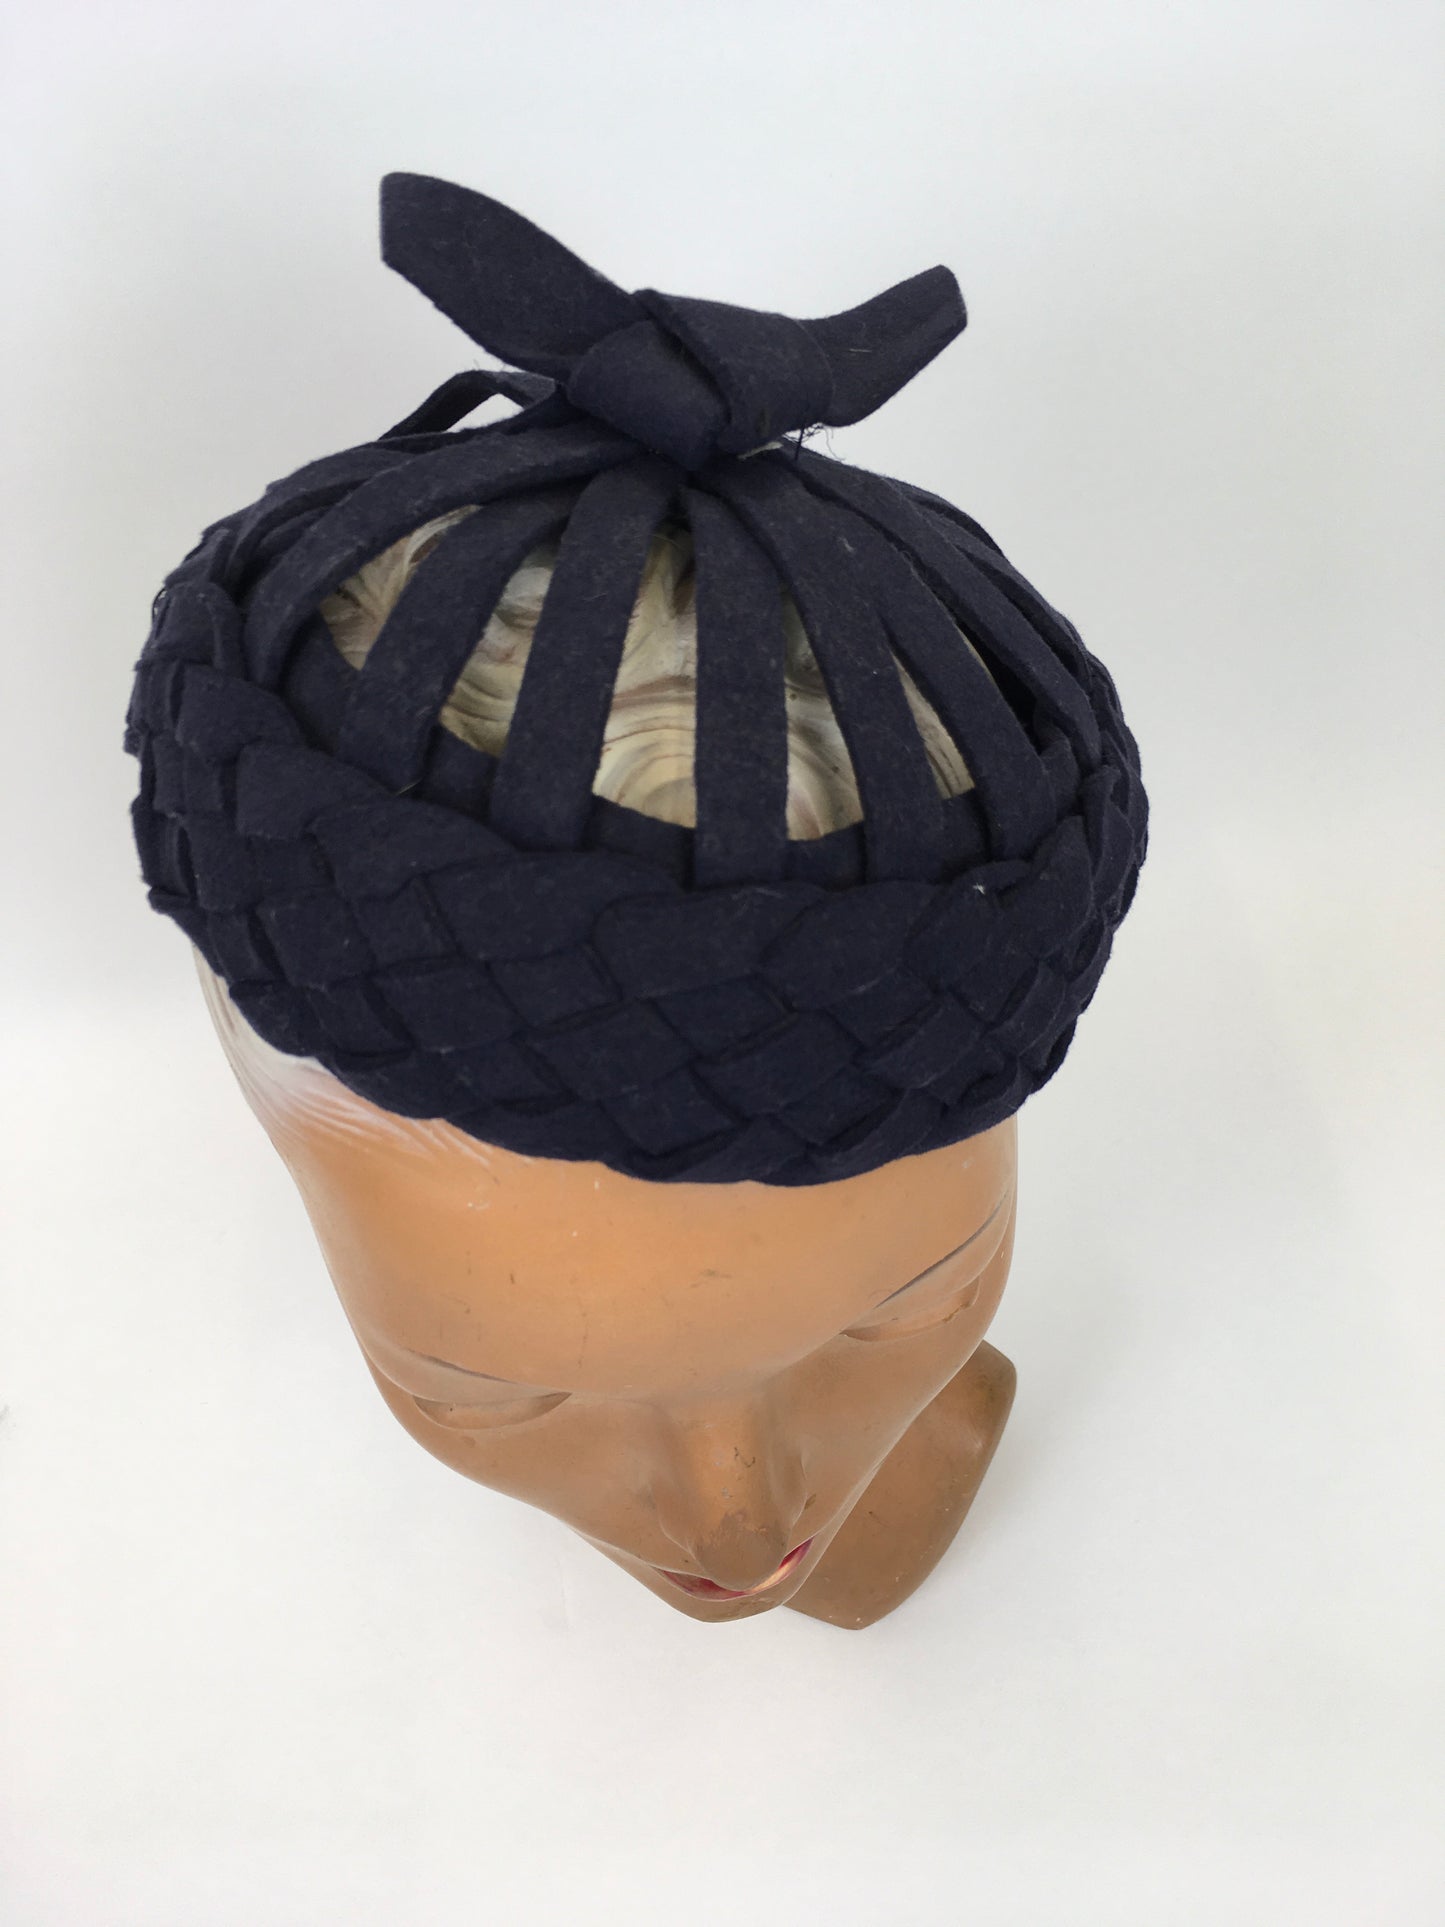 Original 1940s Navy Felt Topper Hat - Featuring Lattice and Weave Felt Work with Bow